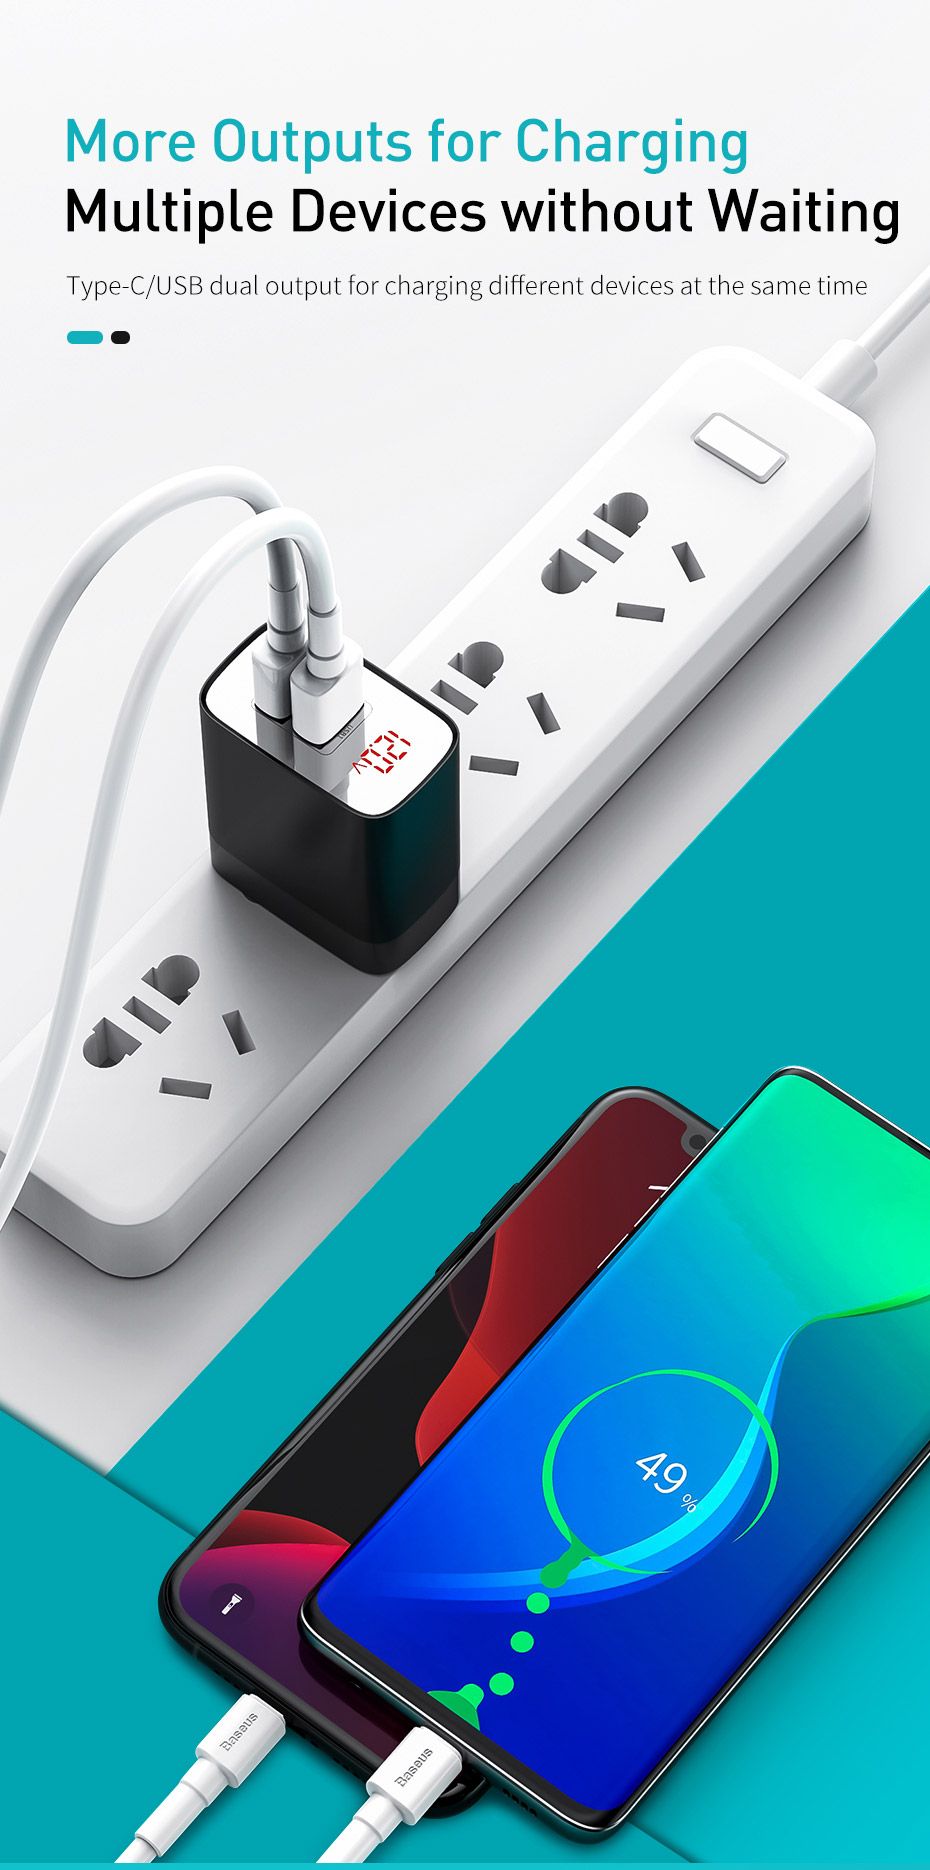 Baseus-18W-Dual-USB-Charger-QC30-PD30-LED-Display-Fast-Charging-For-iPhone-XS-11Pro-Mi10-Note-9S-1684204